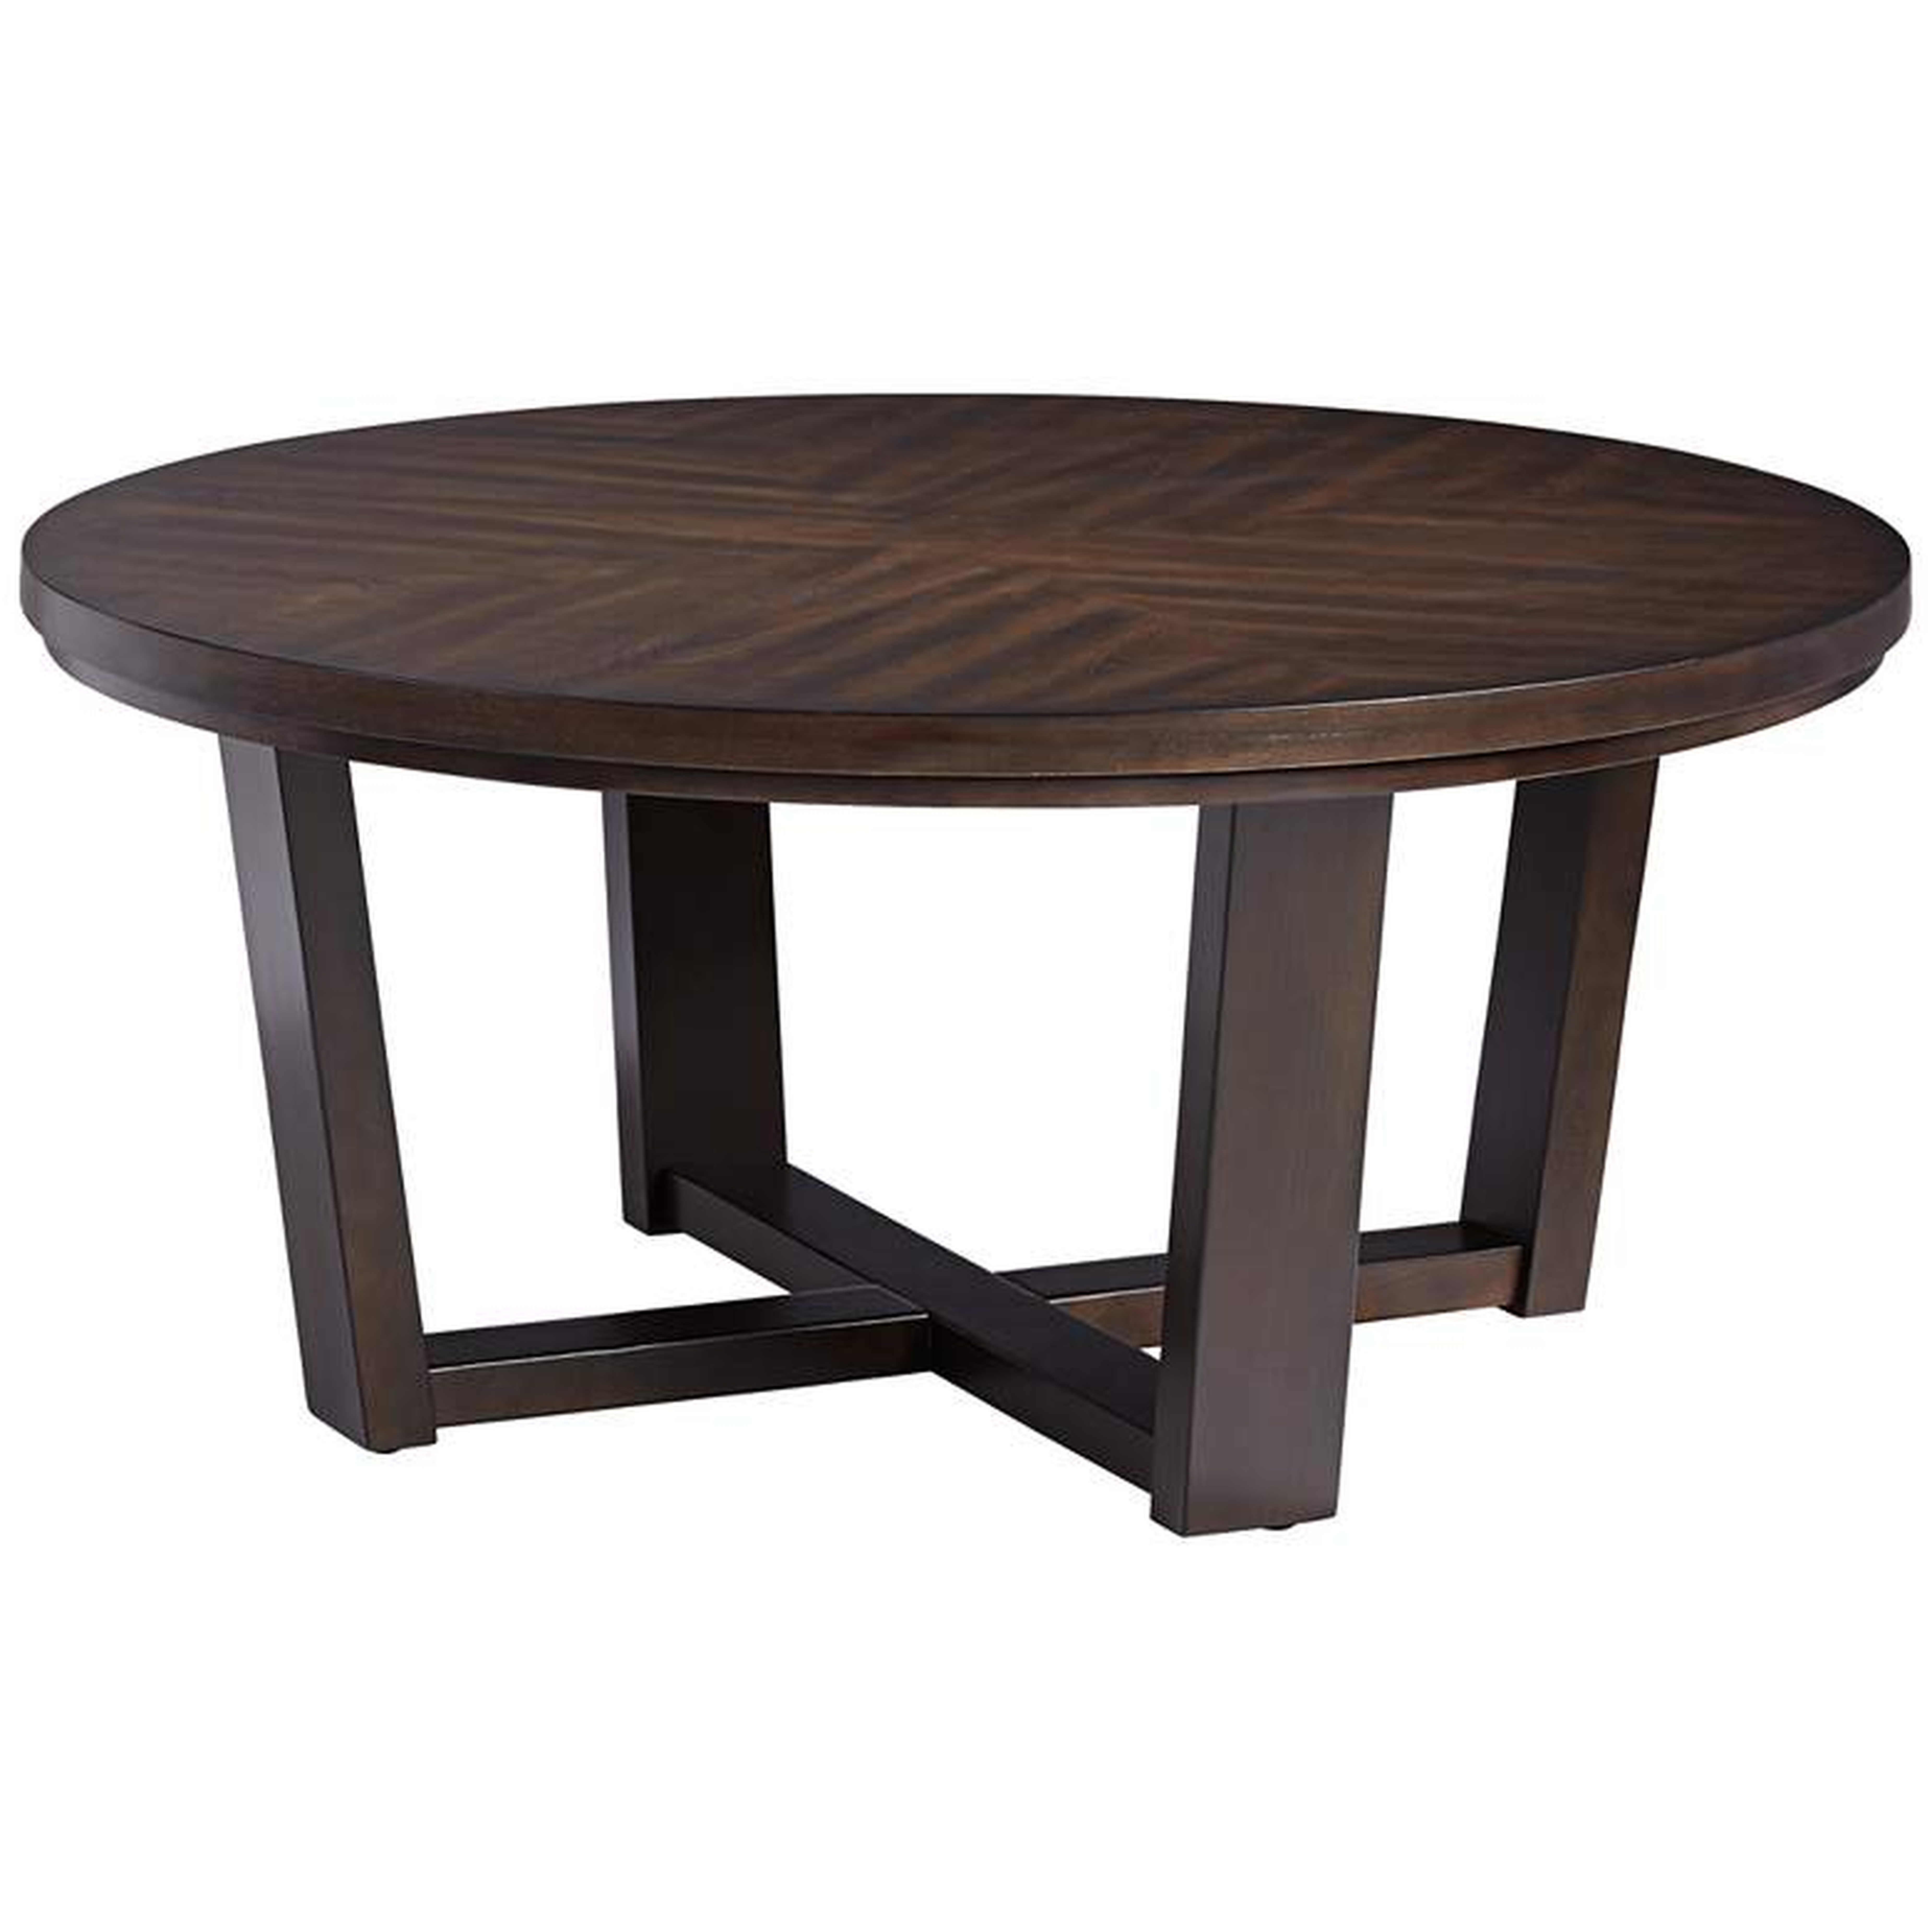 Conrad 40" Wide Dark Brown Wood Round Coffee Table - Style # 56K68 - Lamps Plus